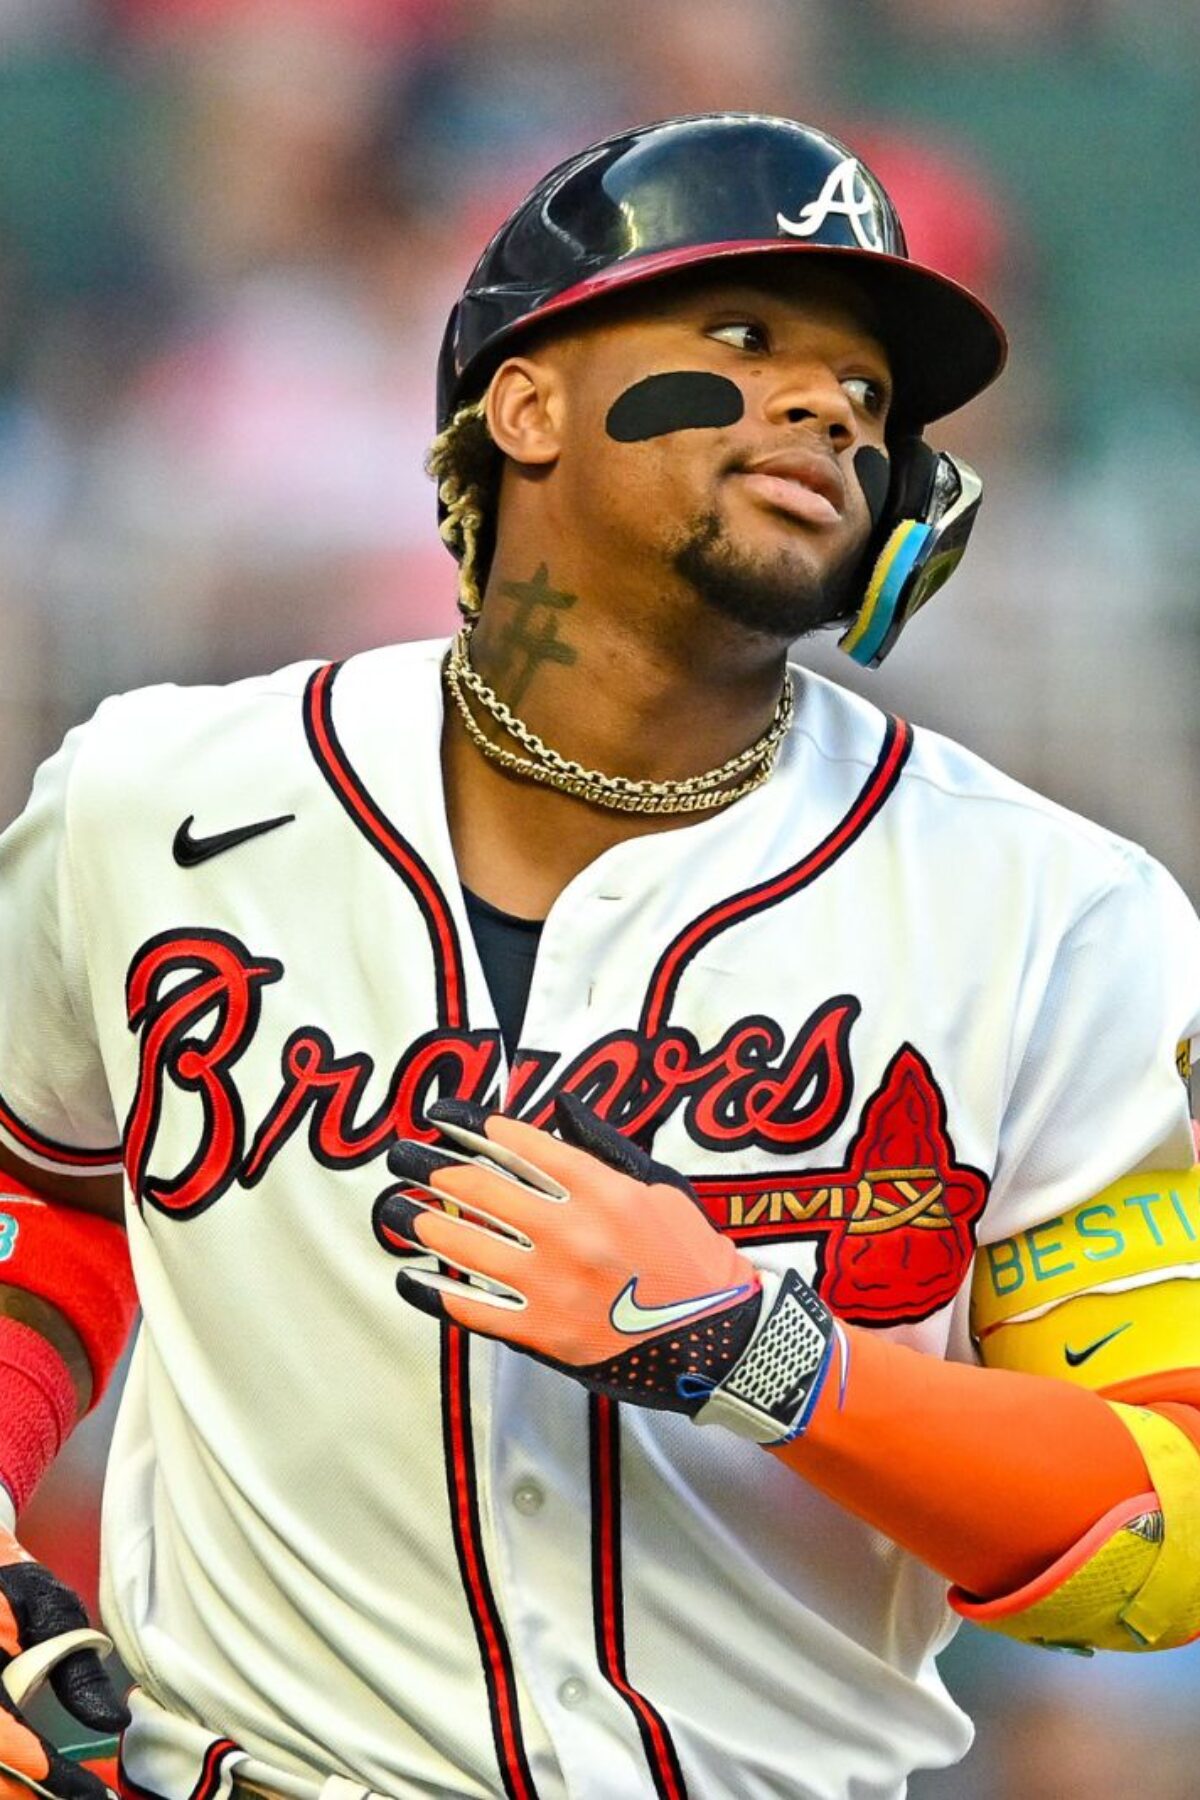 ATLANTA, GA JULY 19: Atlanta right fielder Ronald Acuna Jr. (13) reacts after lining out during the MLB game between the Arizona Diamondbacks and the Atlanta Braves on July 19th, 2023 at Truist Park in Atlanta, GA. (Photo by Rich von Biberstein/Icon Sportswire via Getty Images)